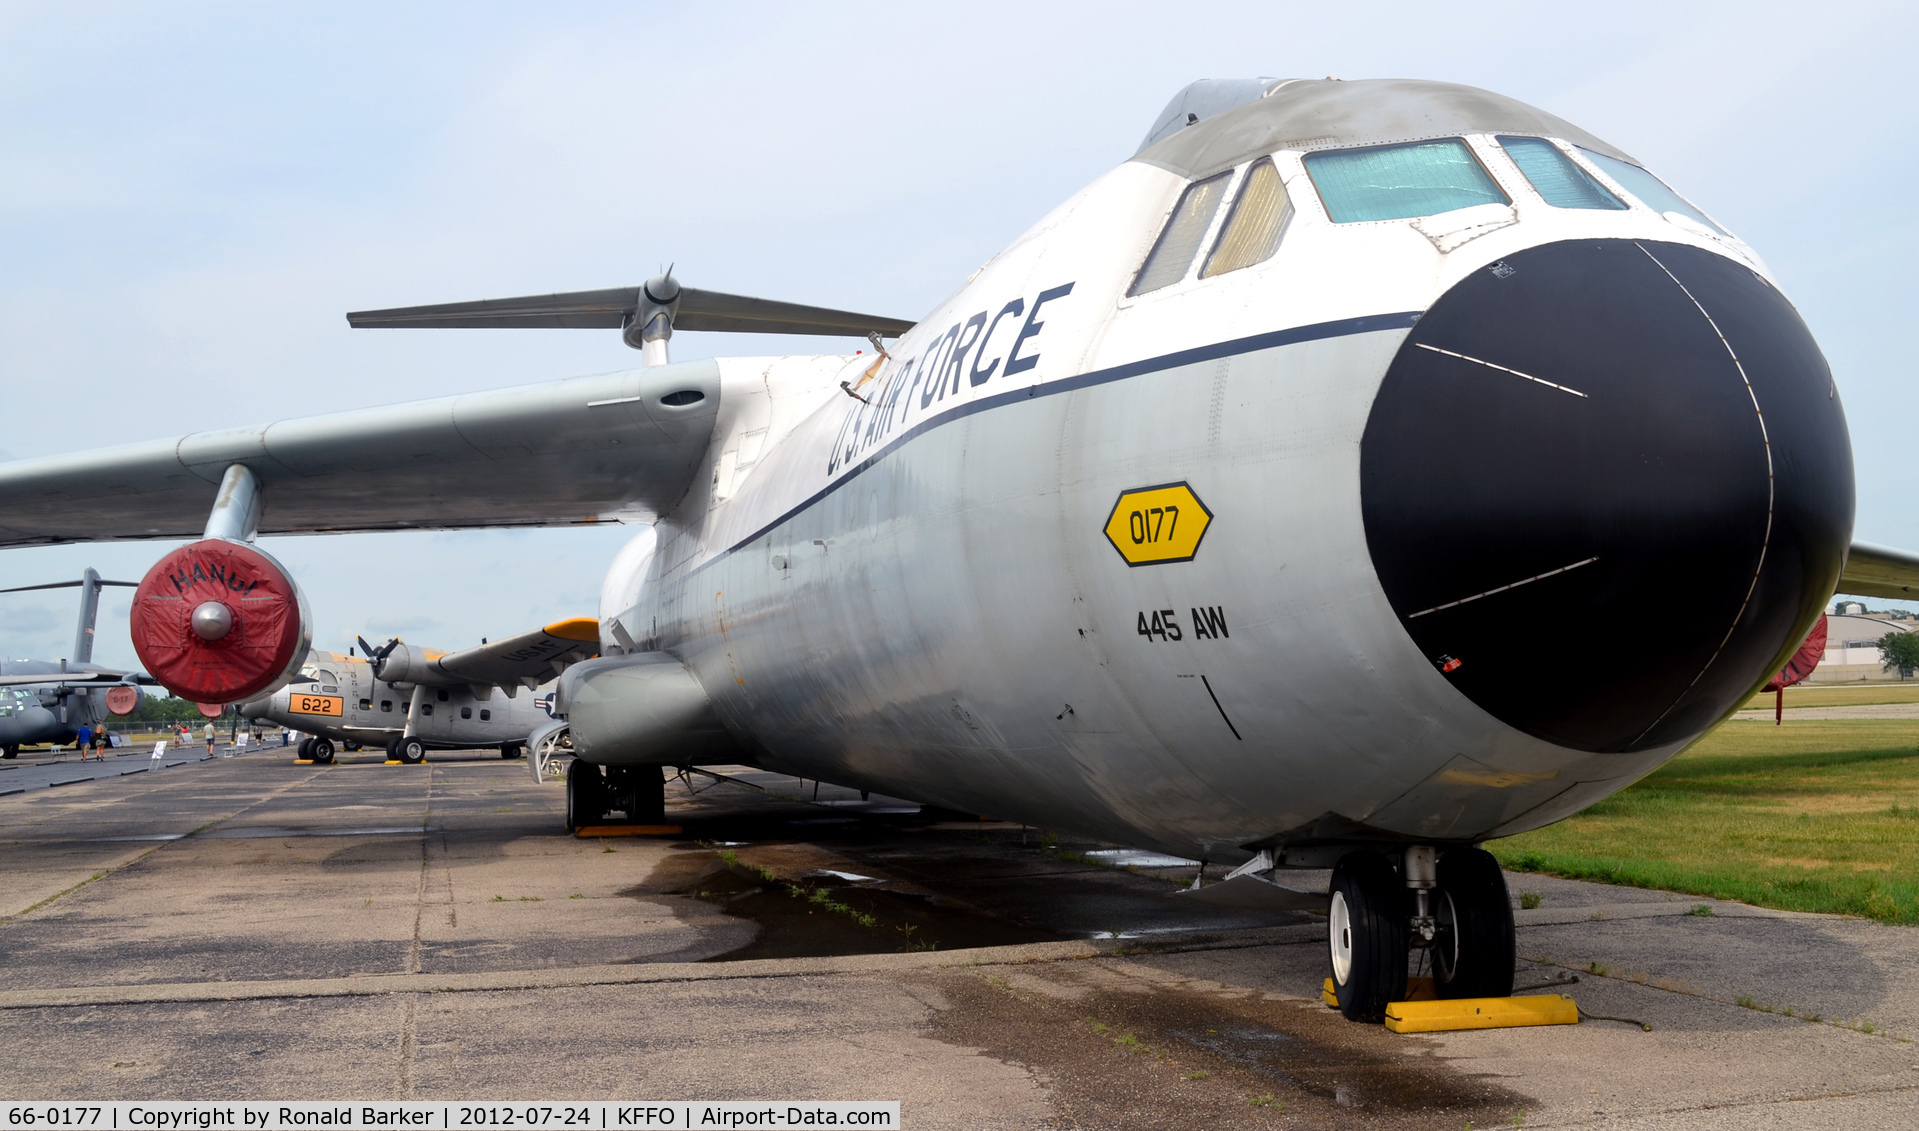 66-0177, 1966 Lockheed C-141C-LM Starlifter C/N 300-6203, AF Museum - The Hanoi Taxi